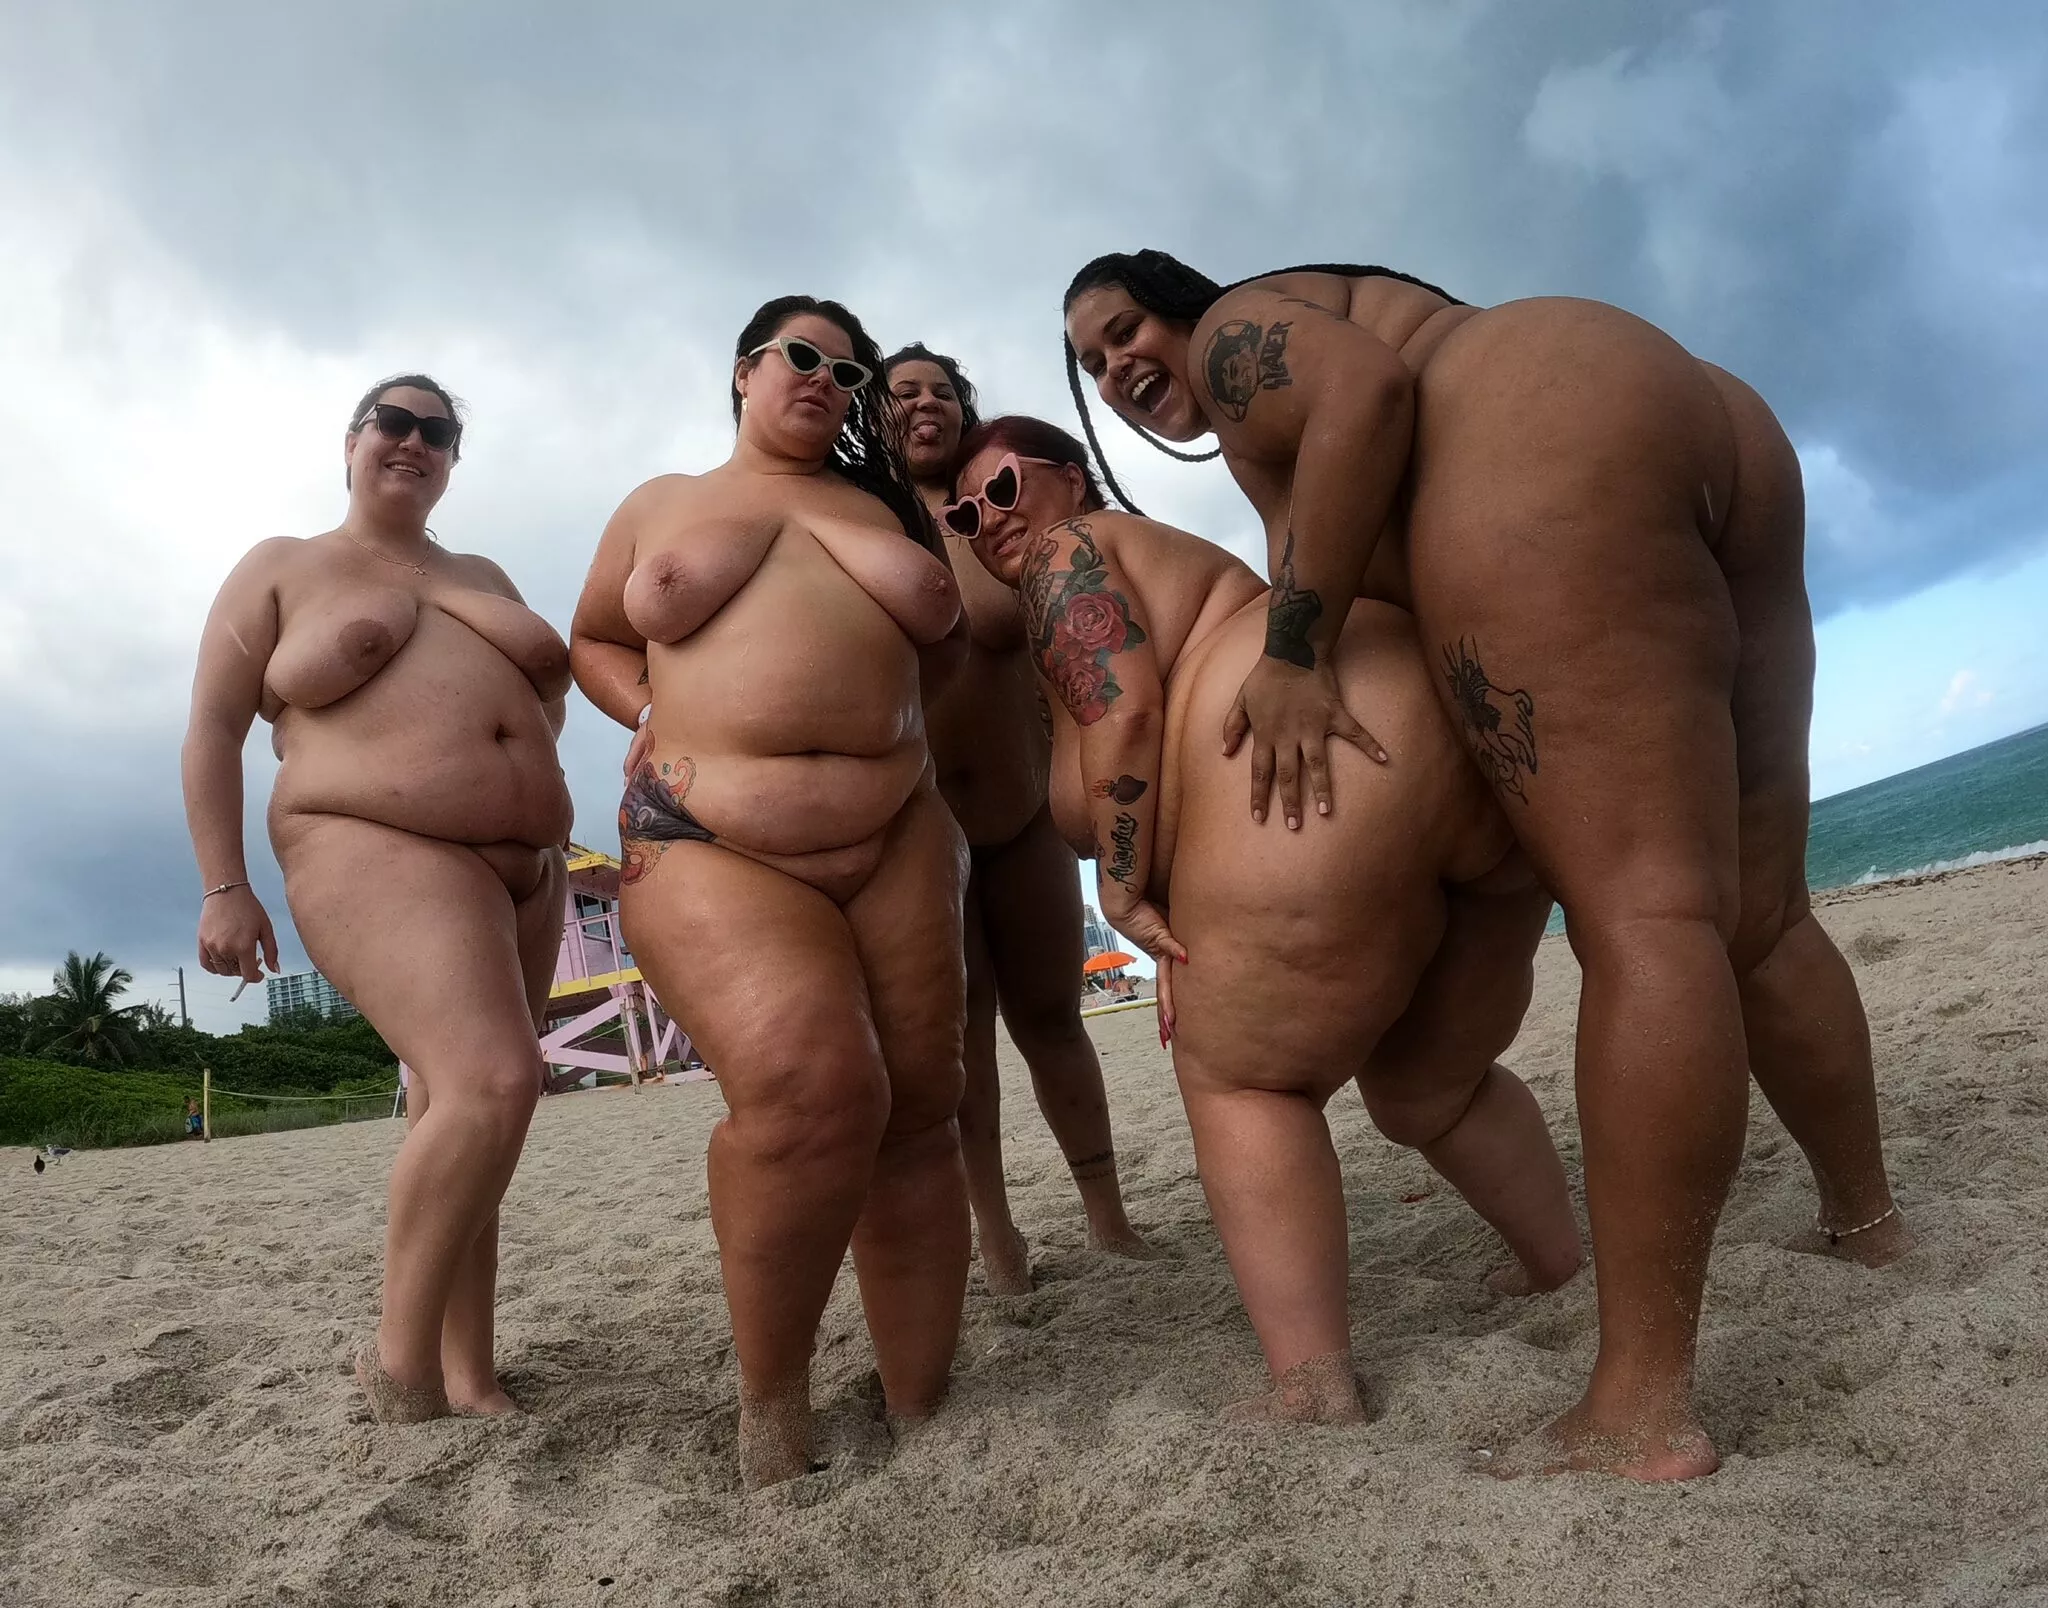 I'd love to be invited to their naked beach party nudes | Watch-porn.net